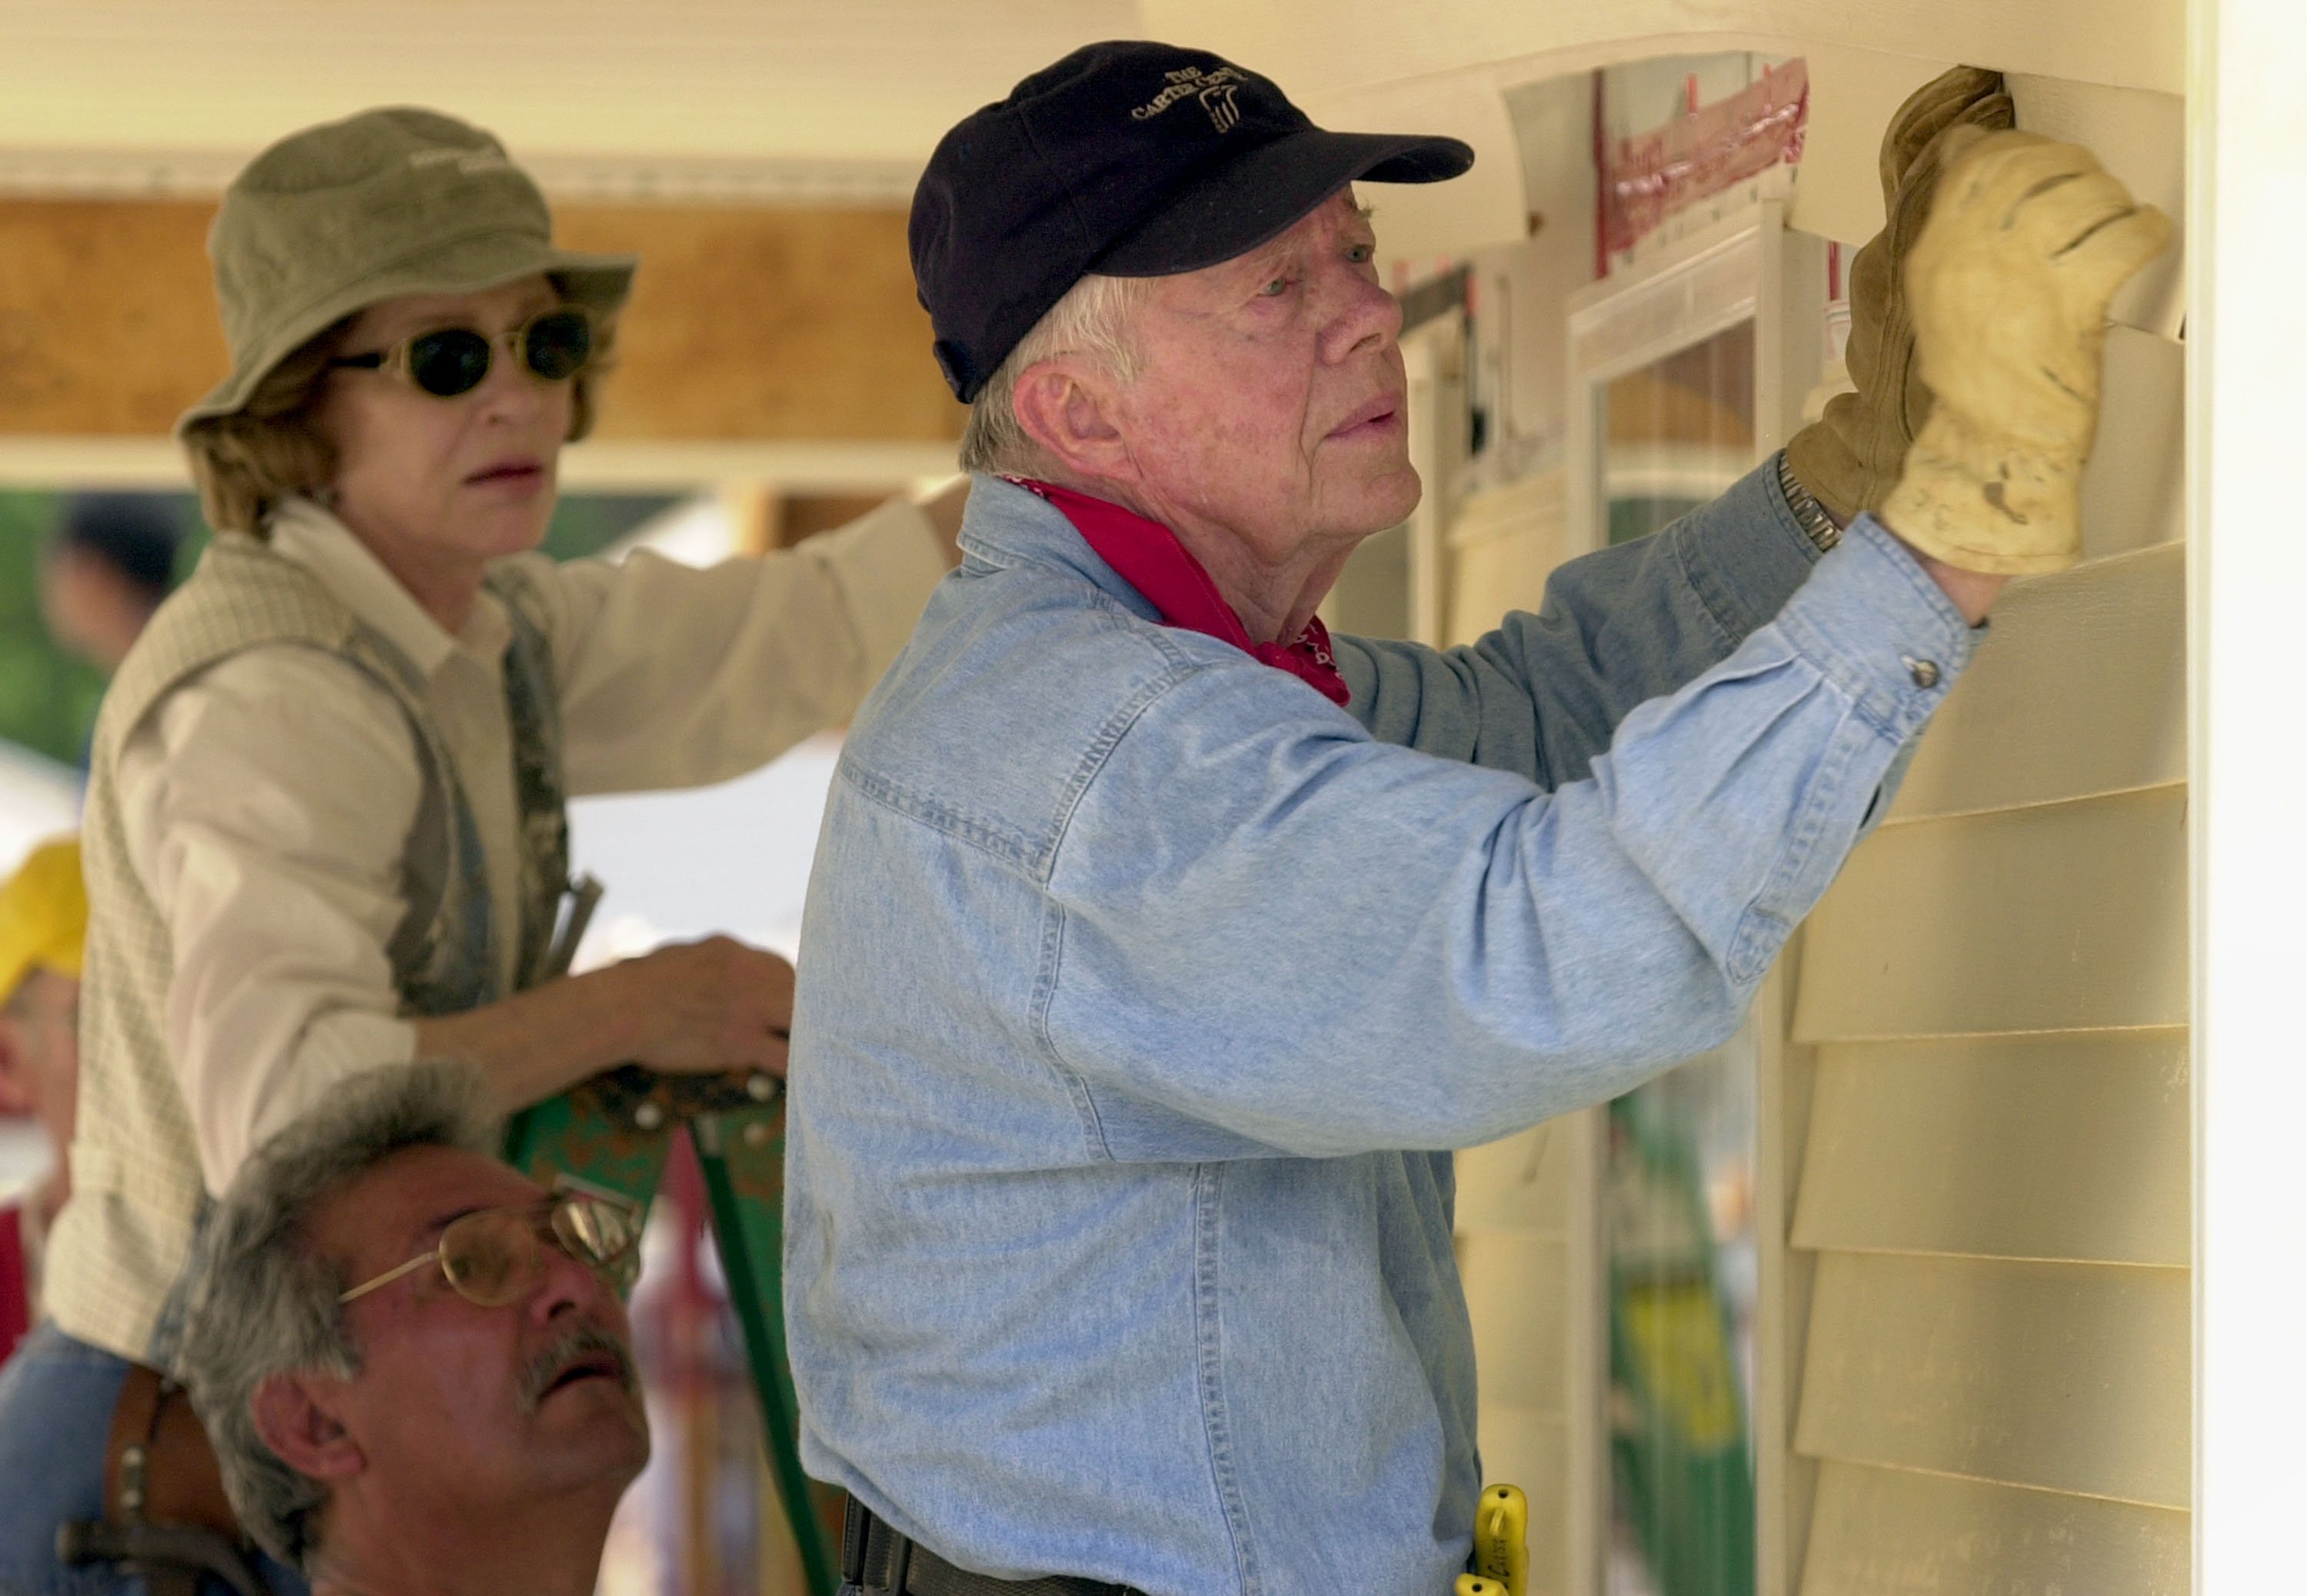 Former US President Jimmy Carter and his wife, Rosalyn, worked on a house for Habitat for Humanity on June 10, 2003, in LaGrange, Georgia. | Source: Getty Images